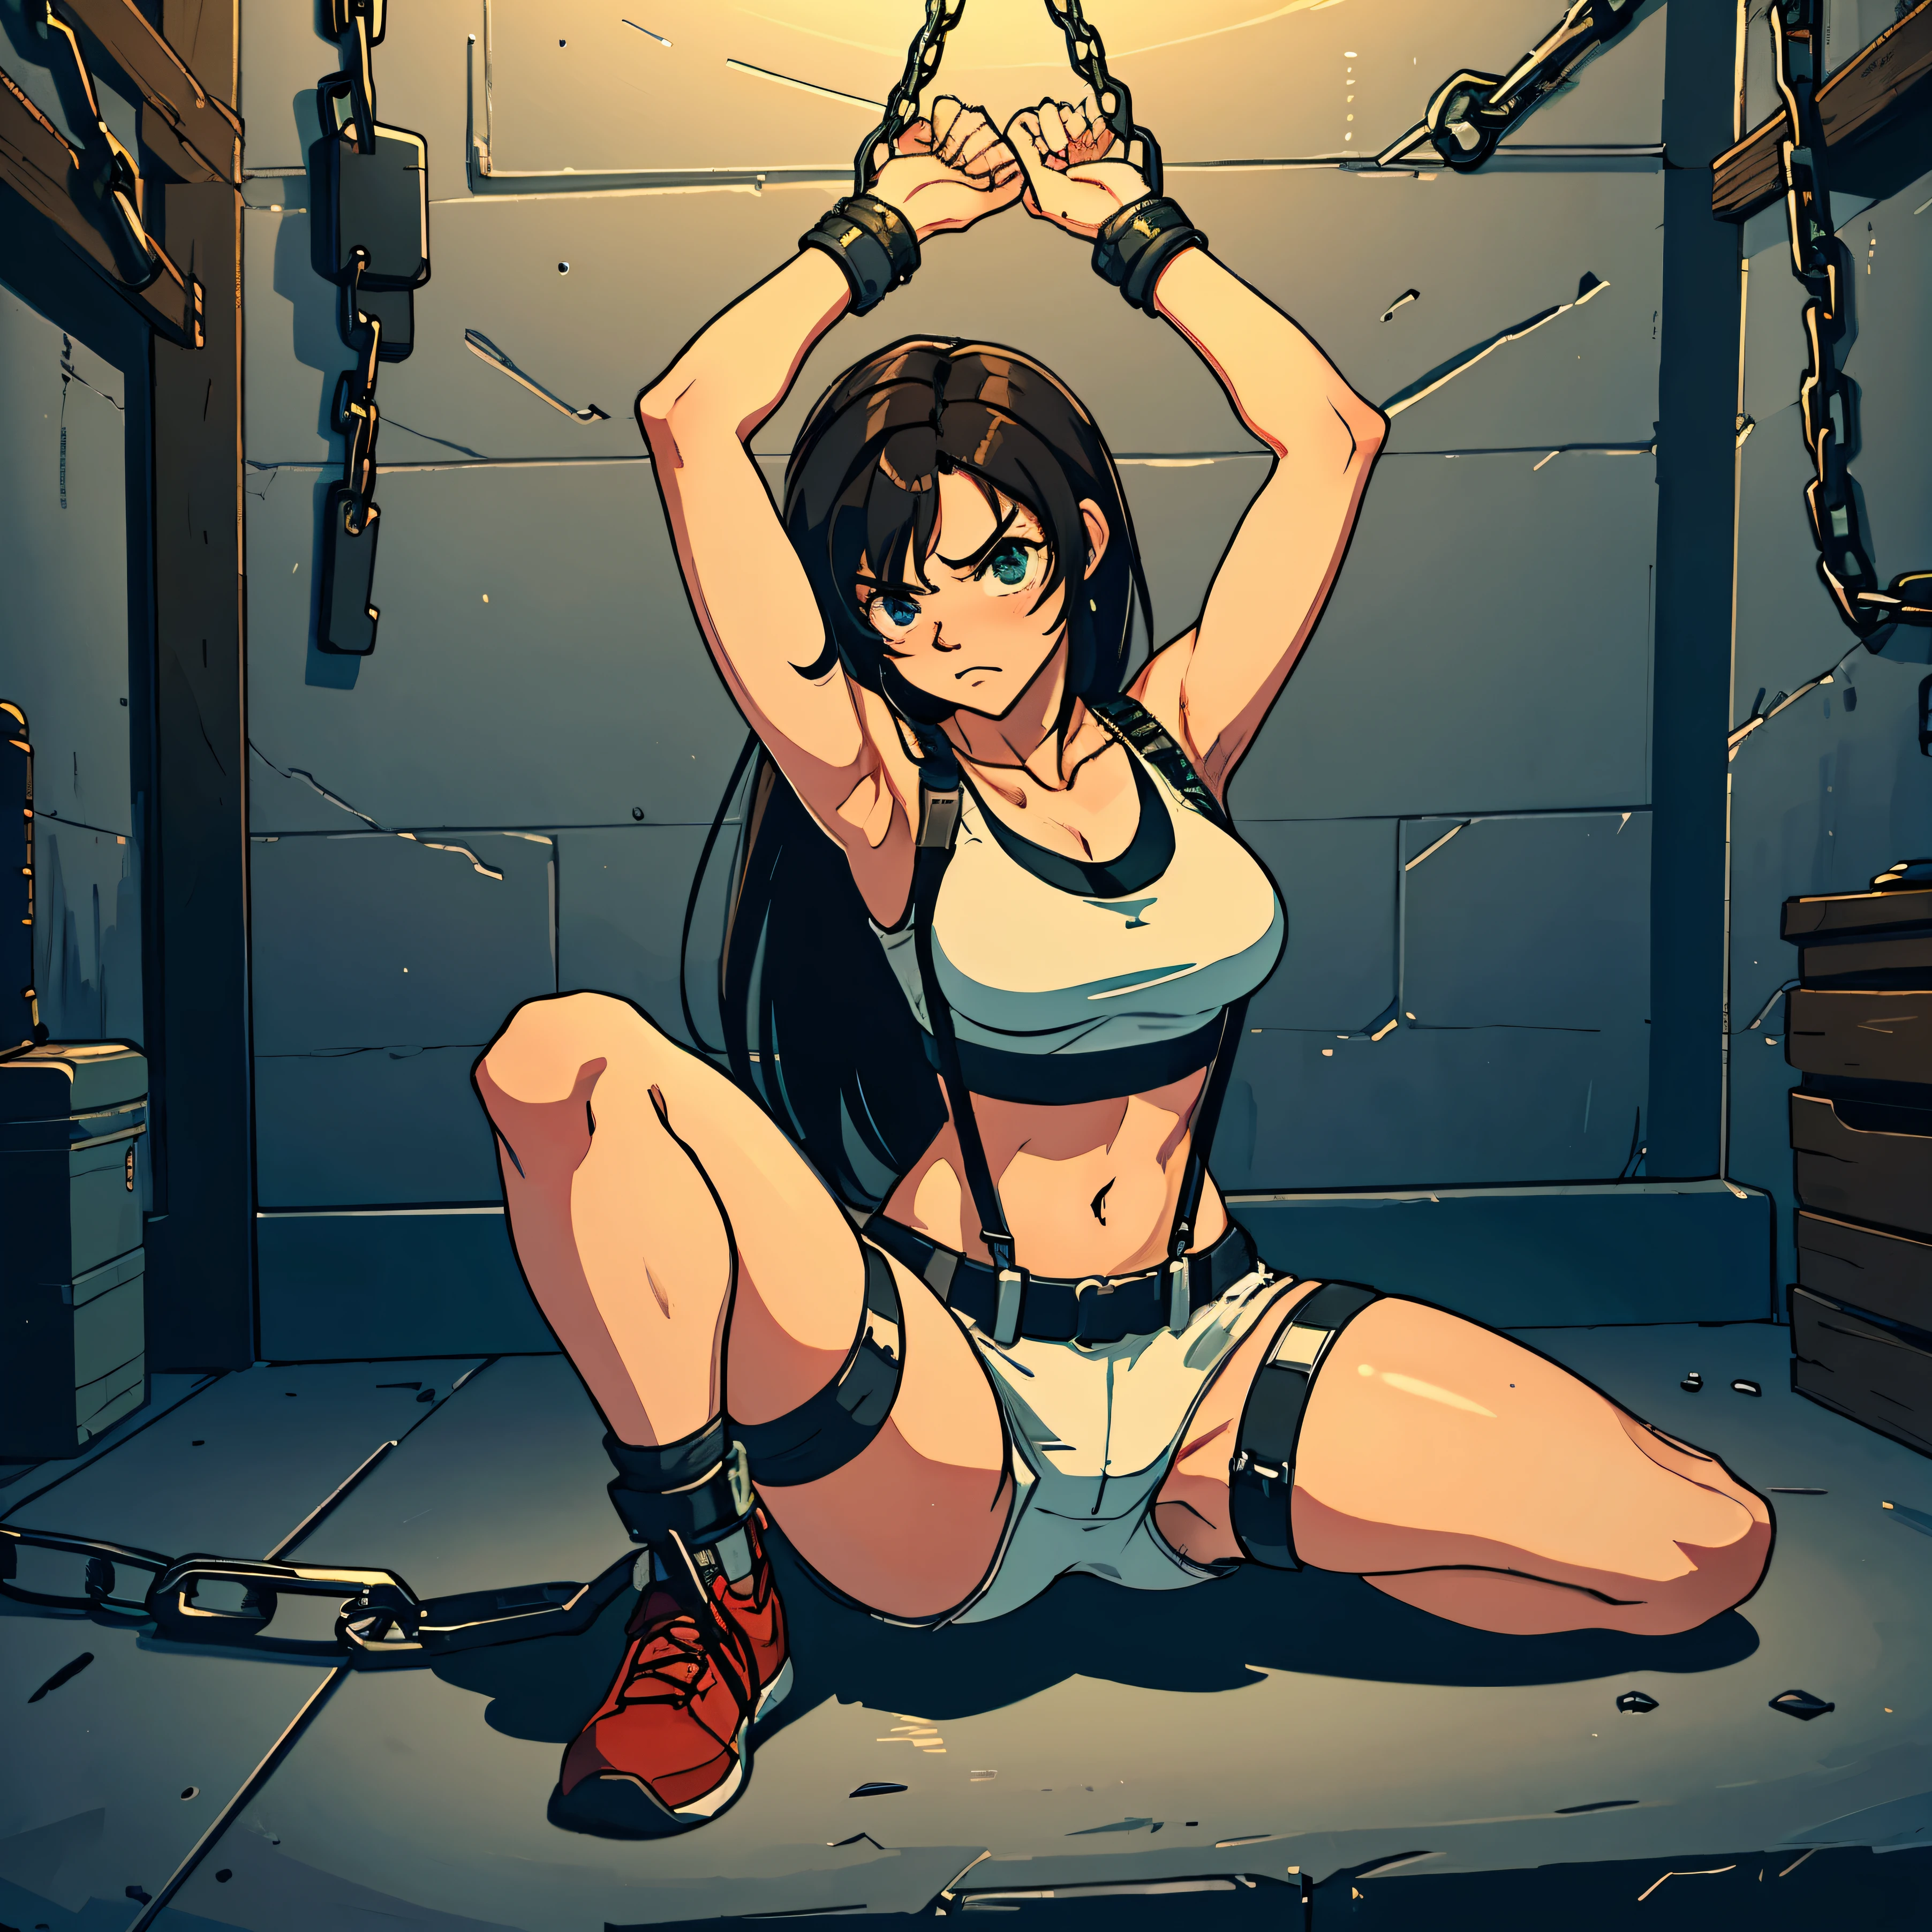 high quality, high resolution, extreme detail, masterpiece, tifa Lockhart, white tank top, tied up by chain,arms up, in the basement,,bondage, (restrained), angry,  full body